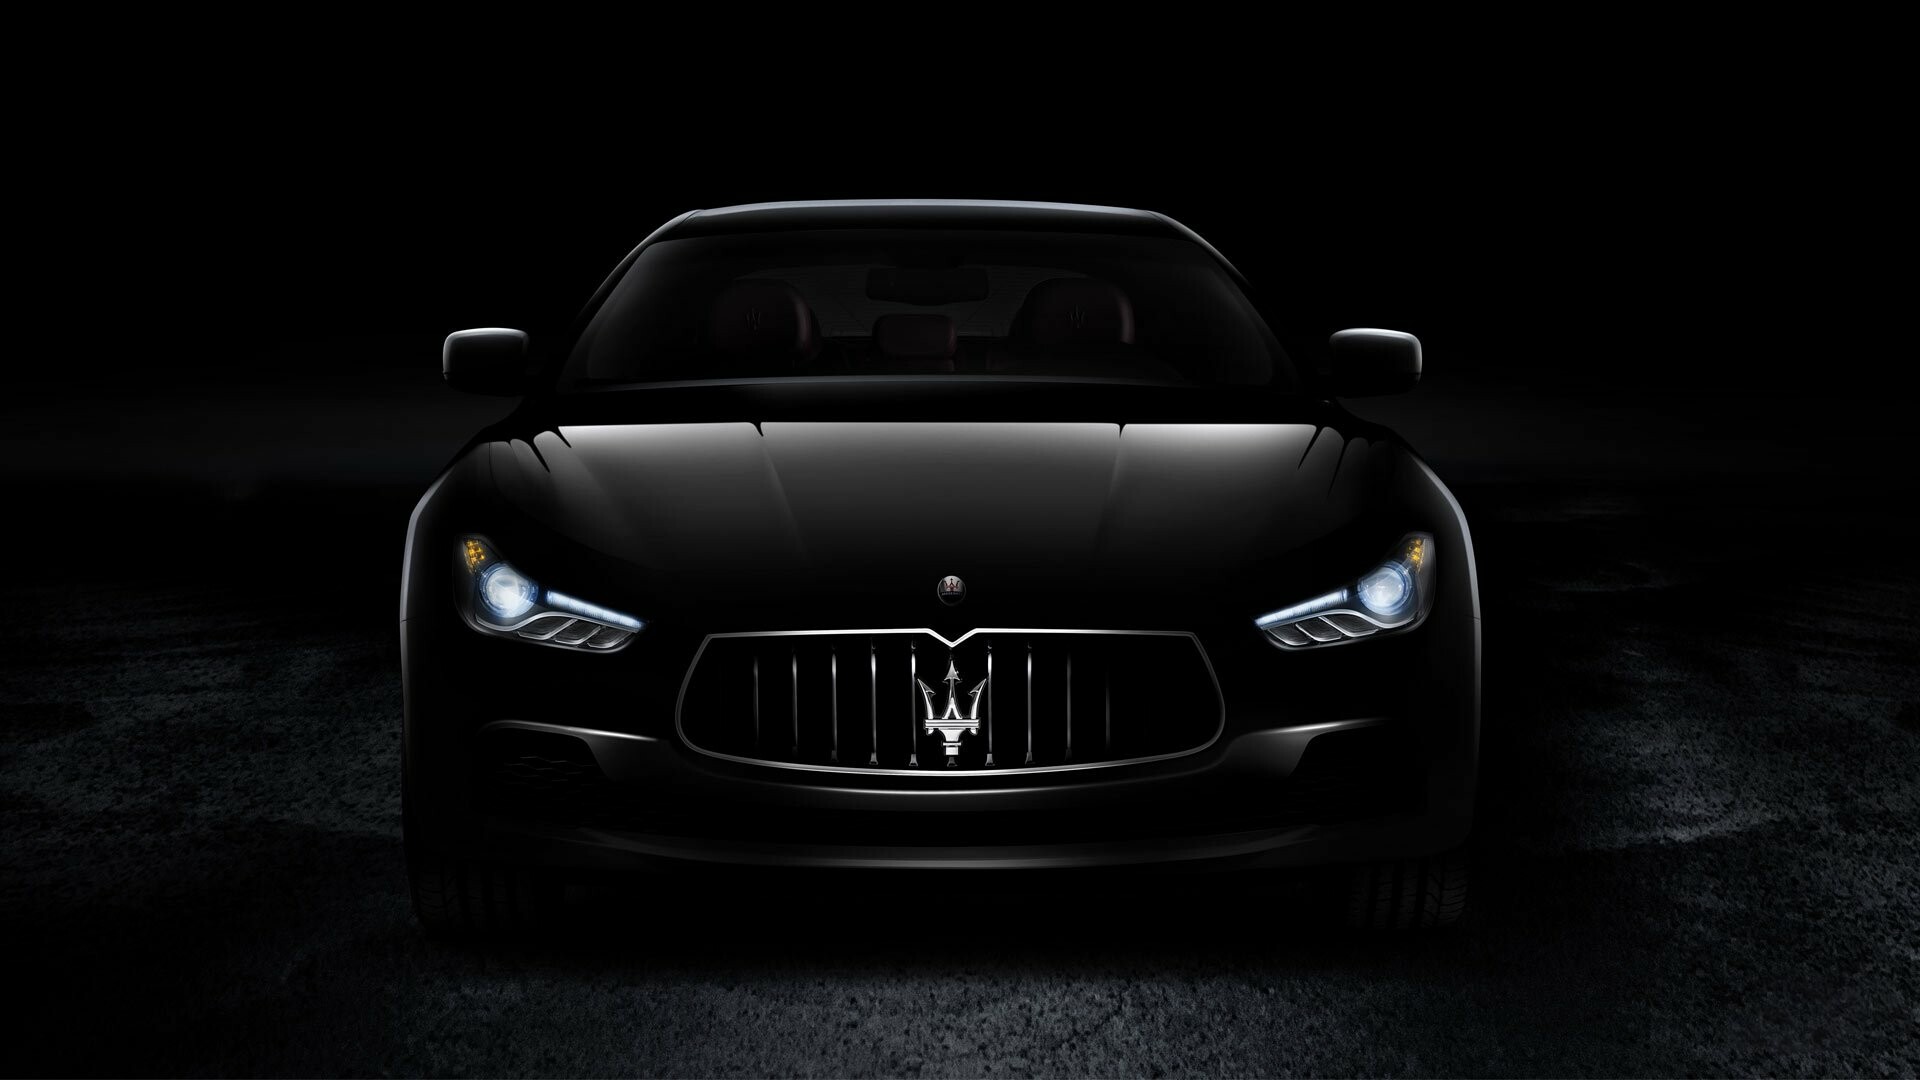 Maserati: Its unique brand of dramatic designs and intoxicating performance still proliferates throughout its small lineup, Italian carmaker. 1920x1080 Full HD Background.